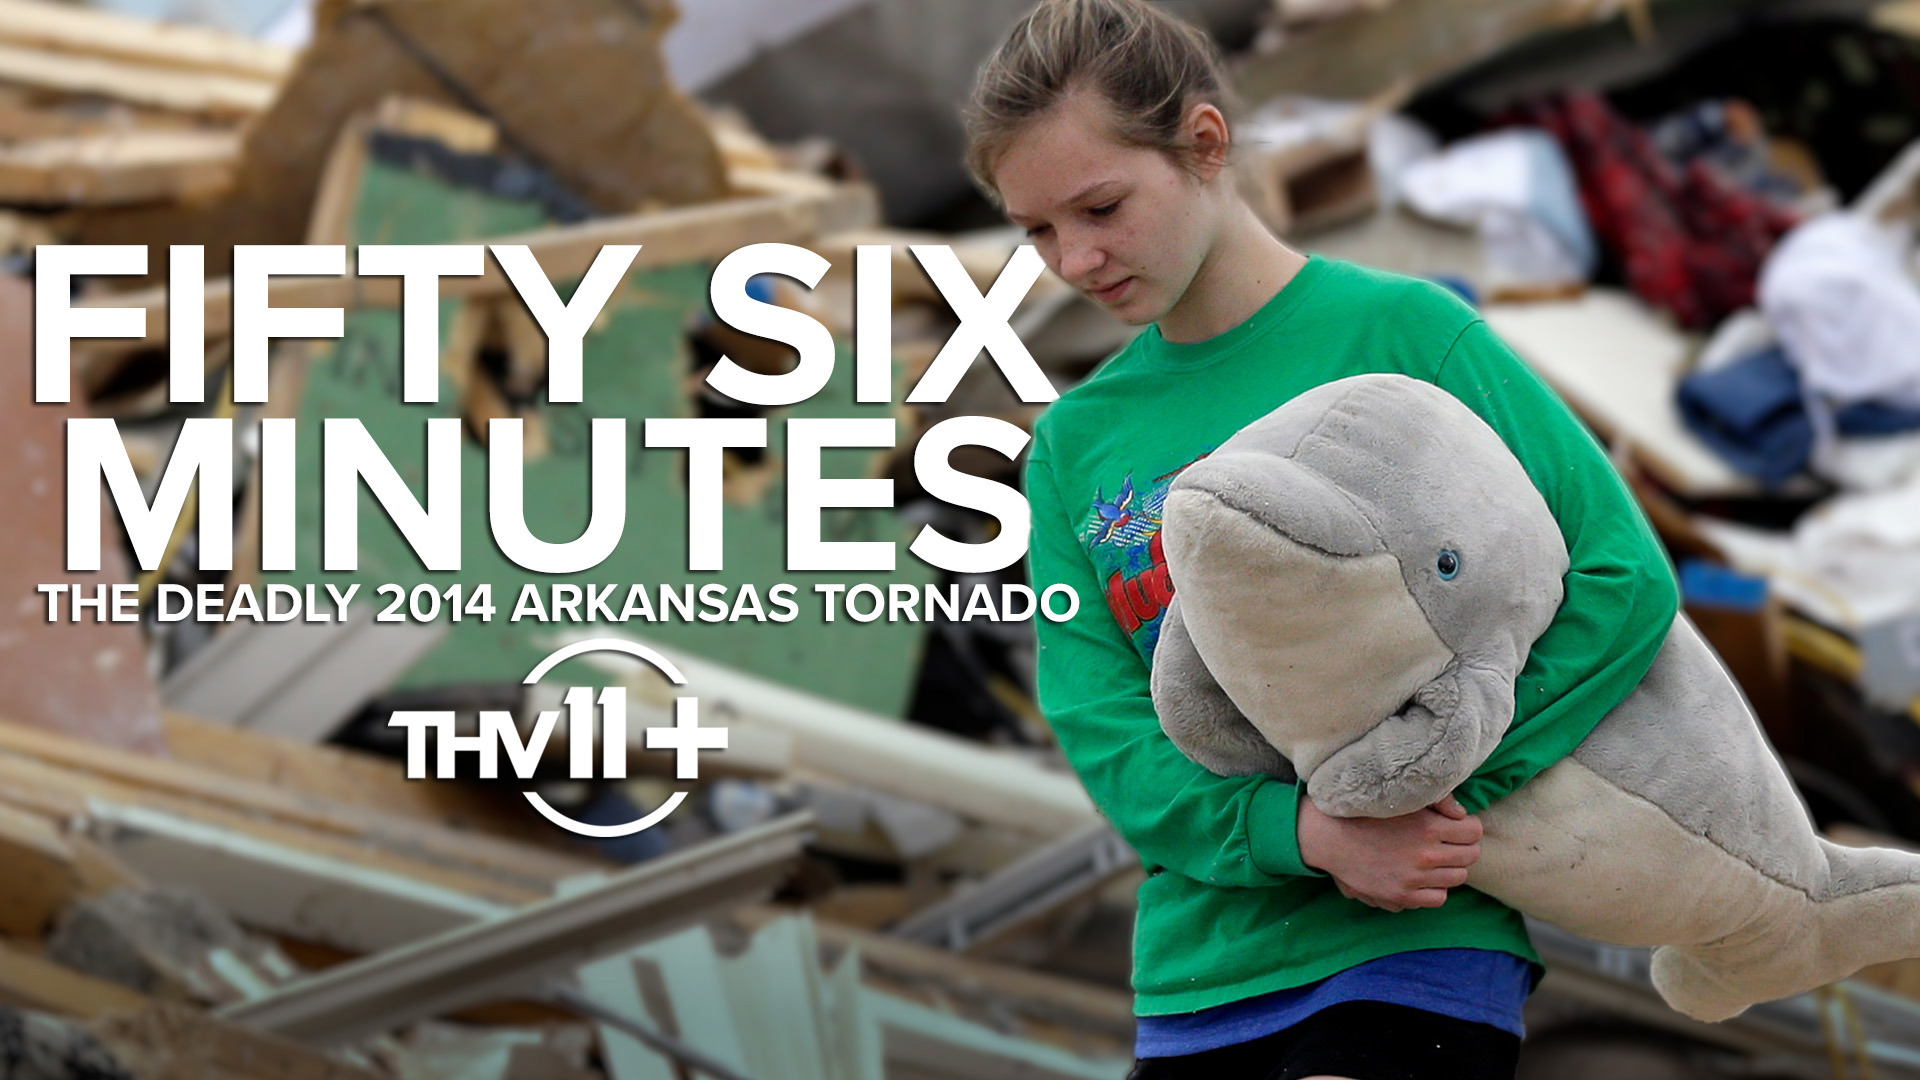 Ten years ago, an EF-4 tornado touched down in Central Arkansas and went on a deadly path of destruction. We spoke with those who were there and experienced it.